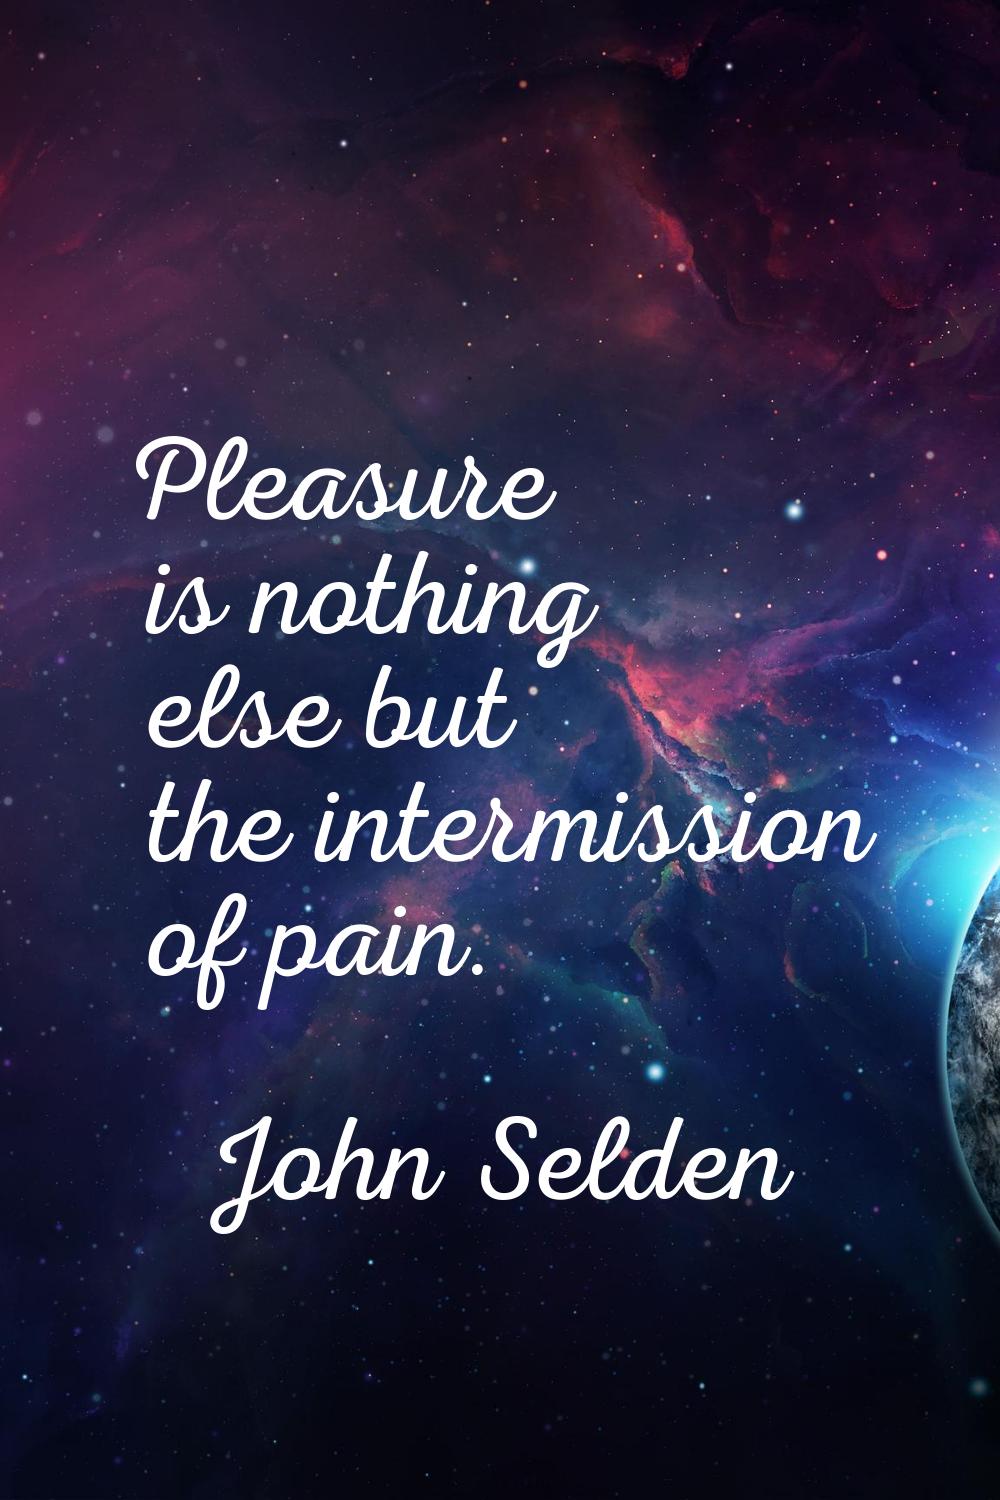 Pleasure is nothing else but the intermission of pain.